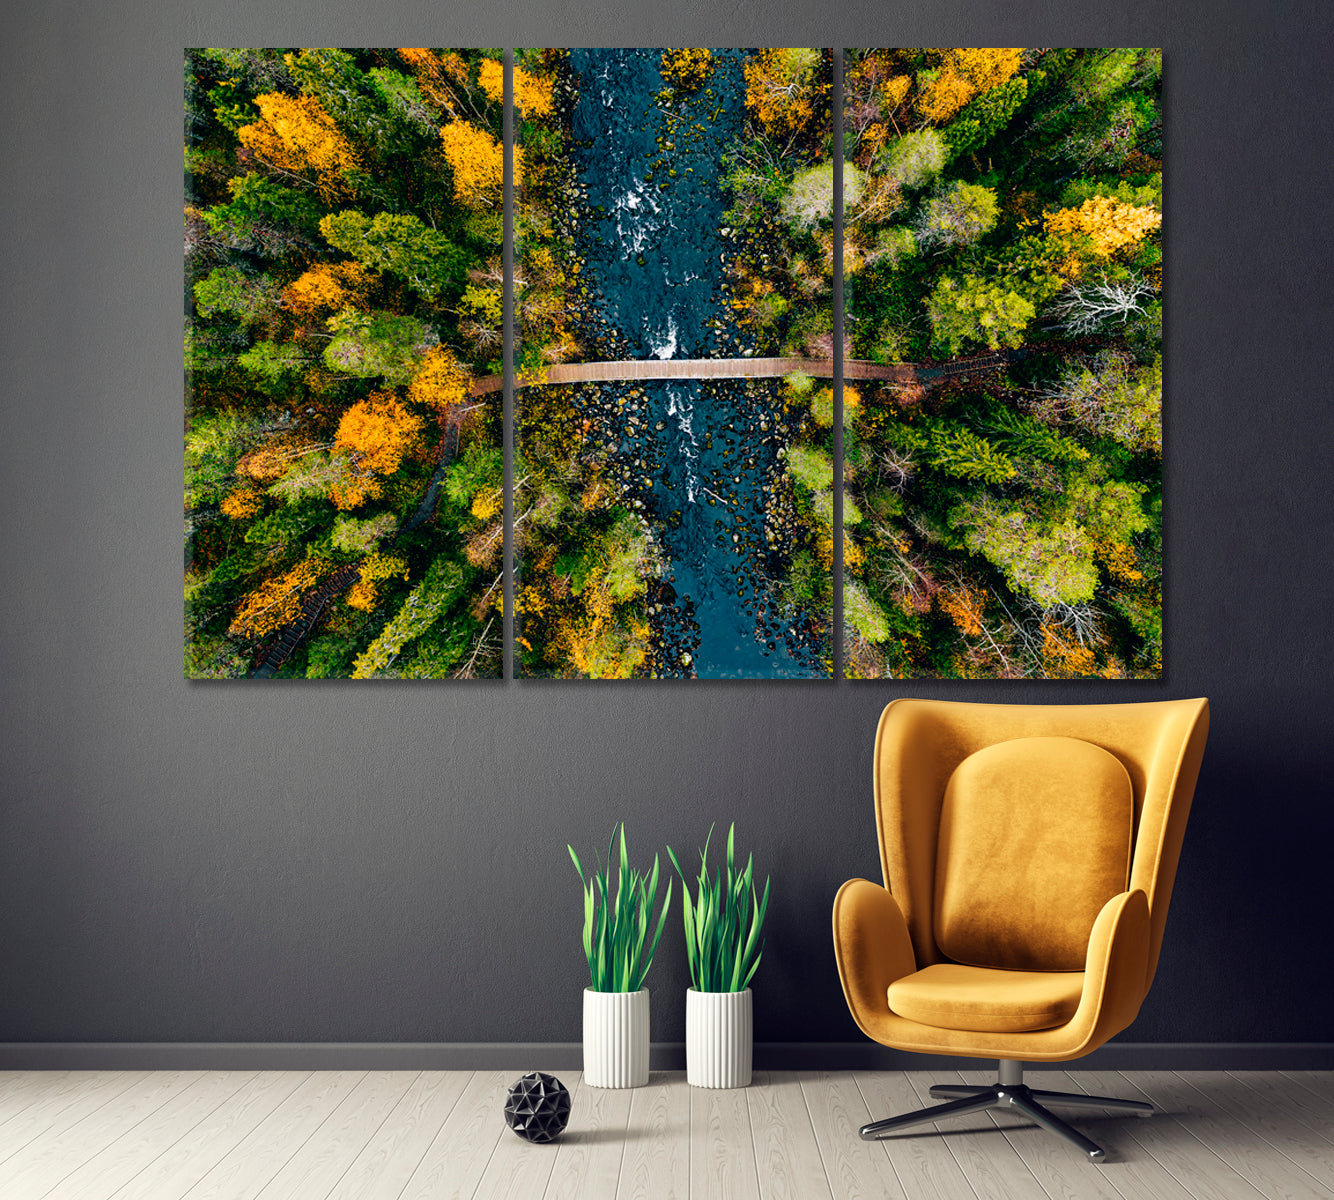 Autumn Forest and River in Oulanka National Park Finland Canvas Print ArtLexy 3 Panels 36"x24" inches 